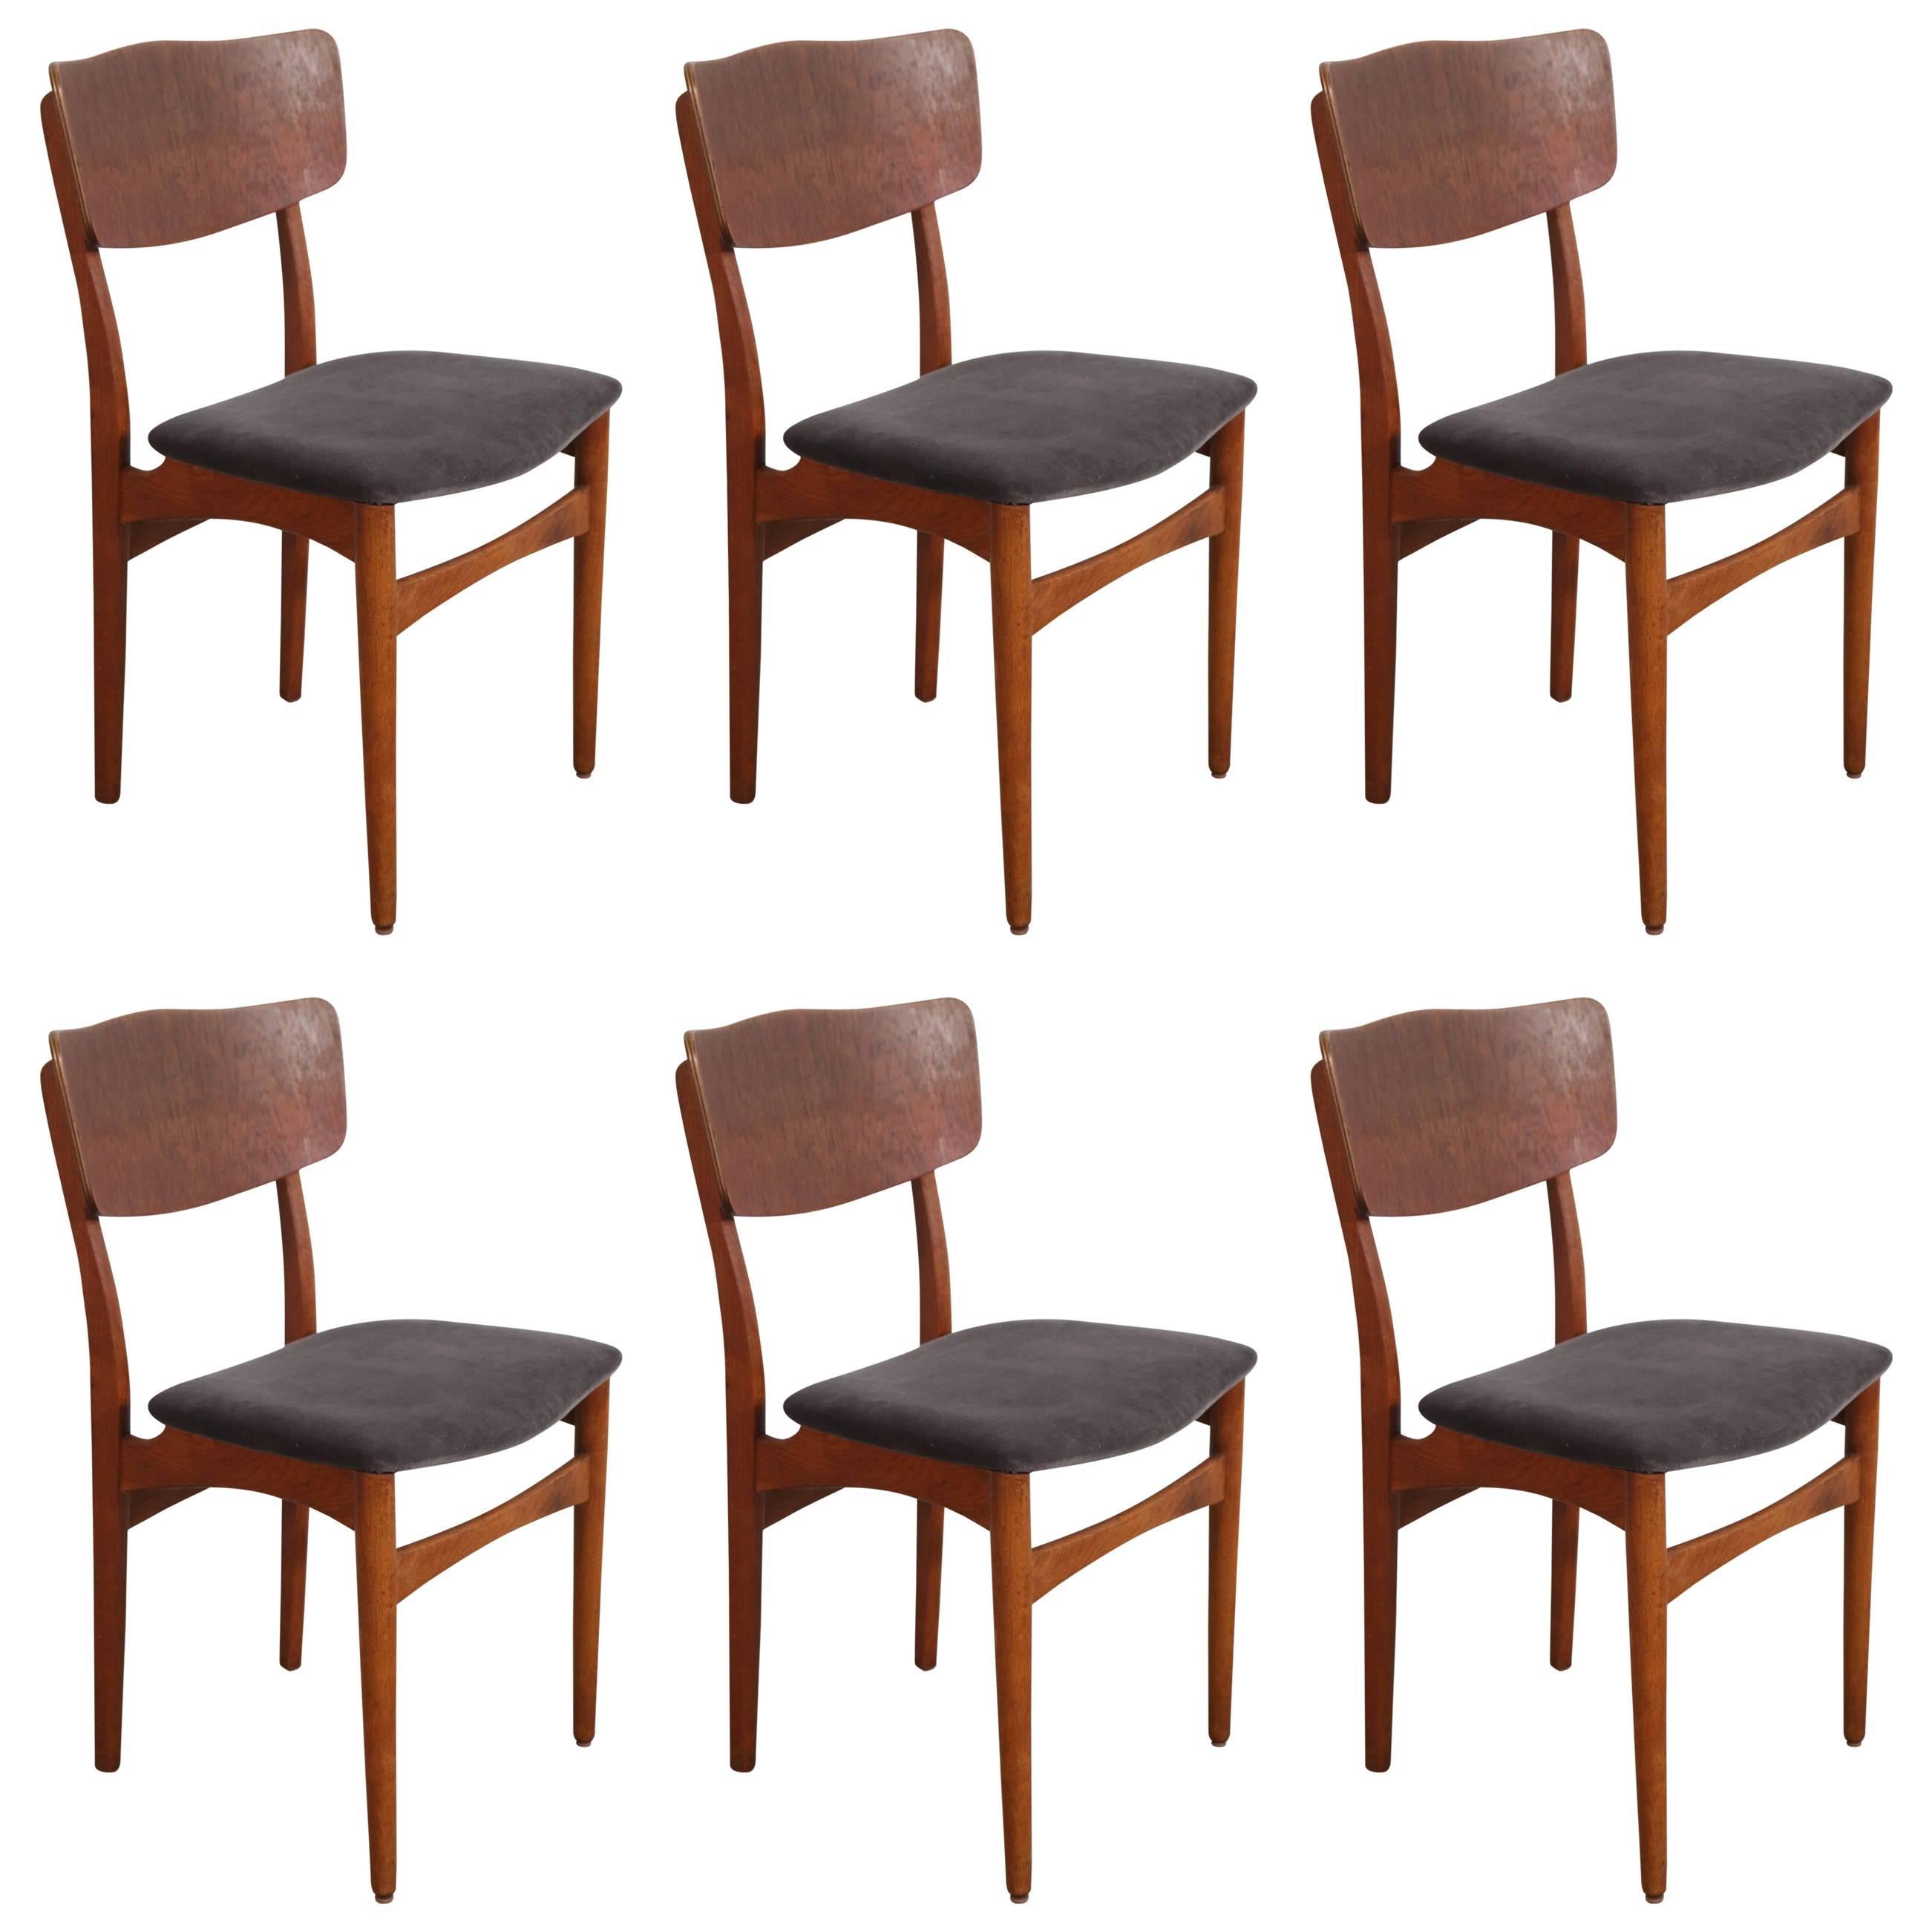 Mid-Century Teak Framed Dining Chairs with Velvet Seat Cushion